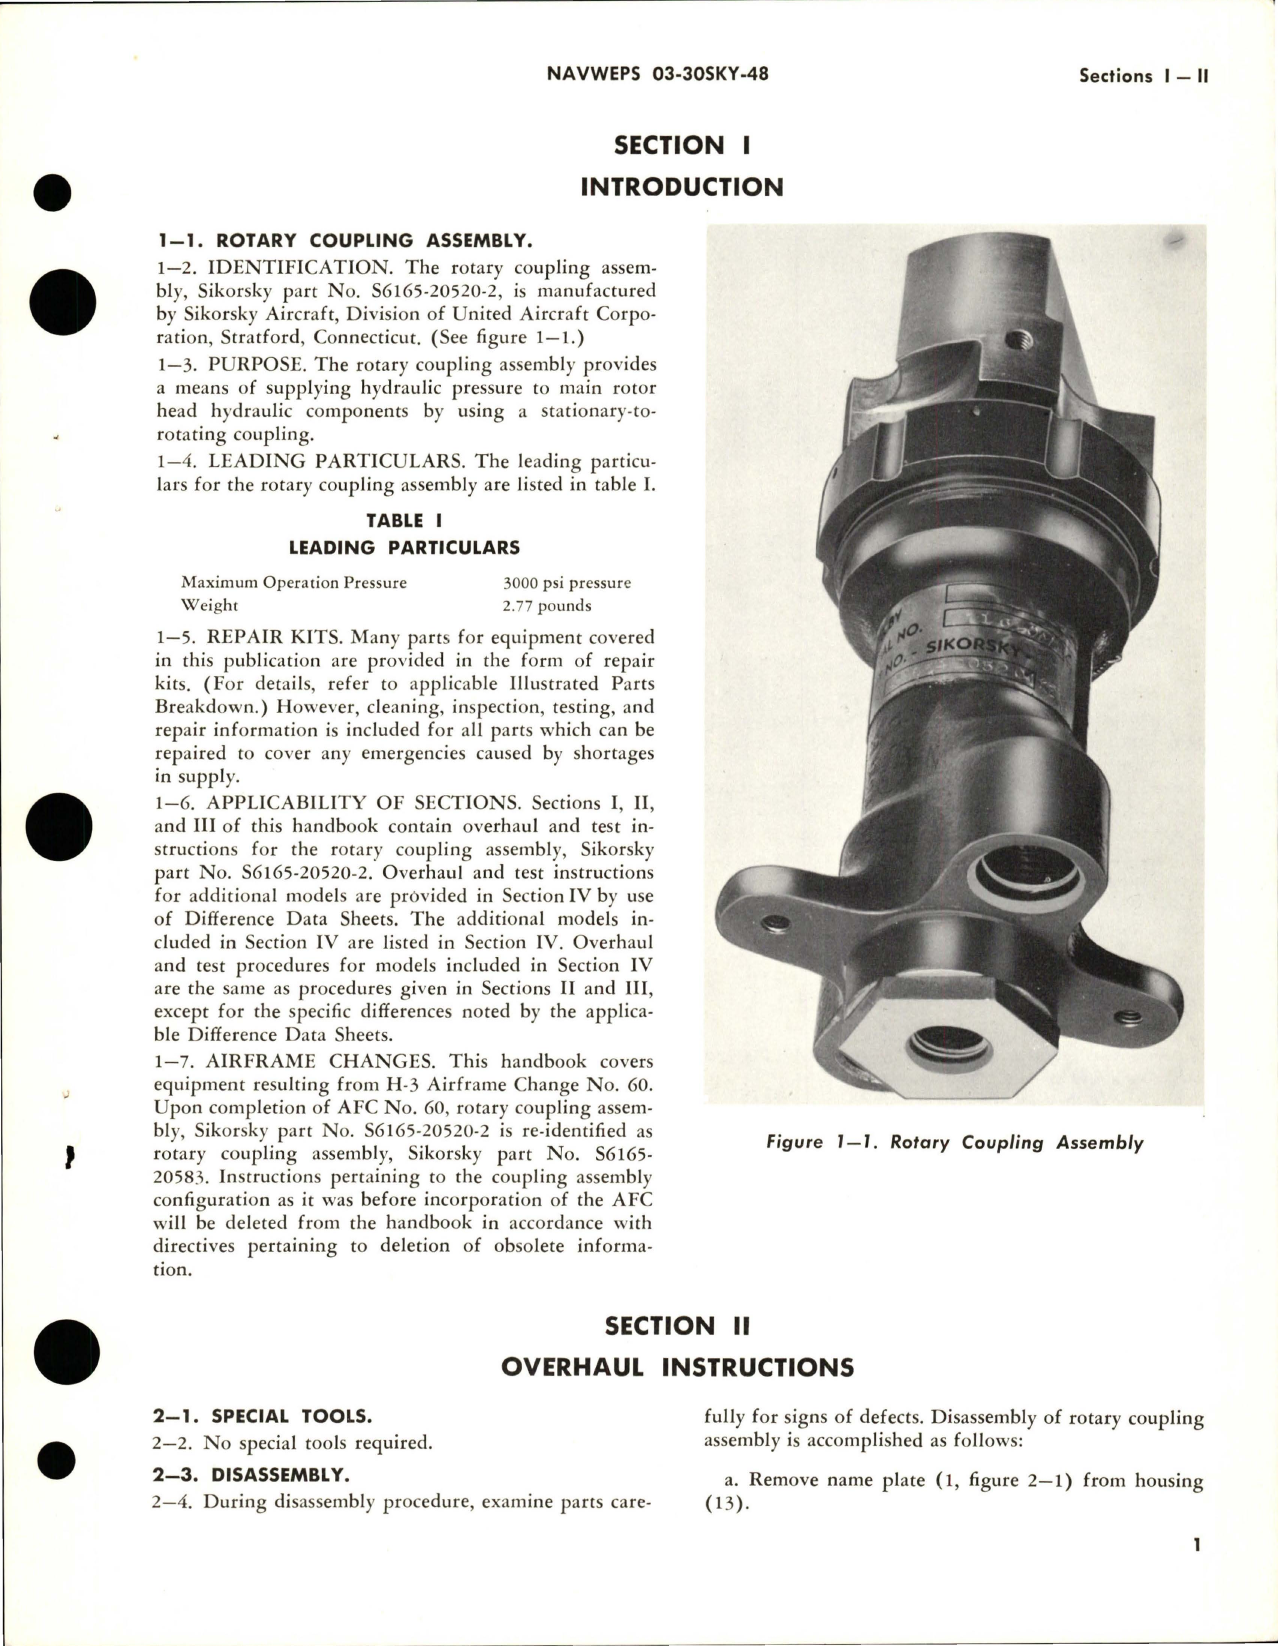 Sample page 5 from AirCorps Library document: Overhaul Instructions for Rotary Coupling Assembly - Parts S6165-20520-2 and S6165-20583